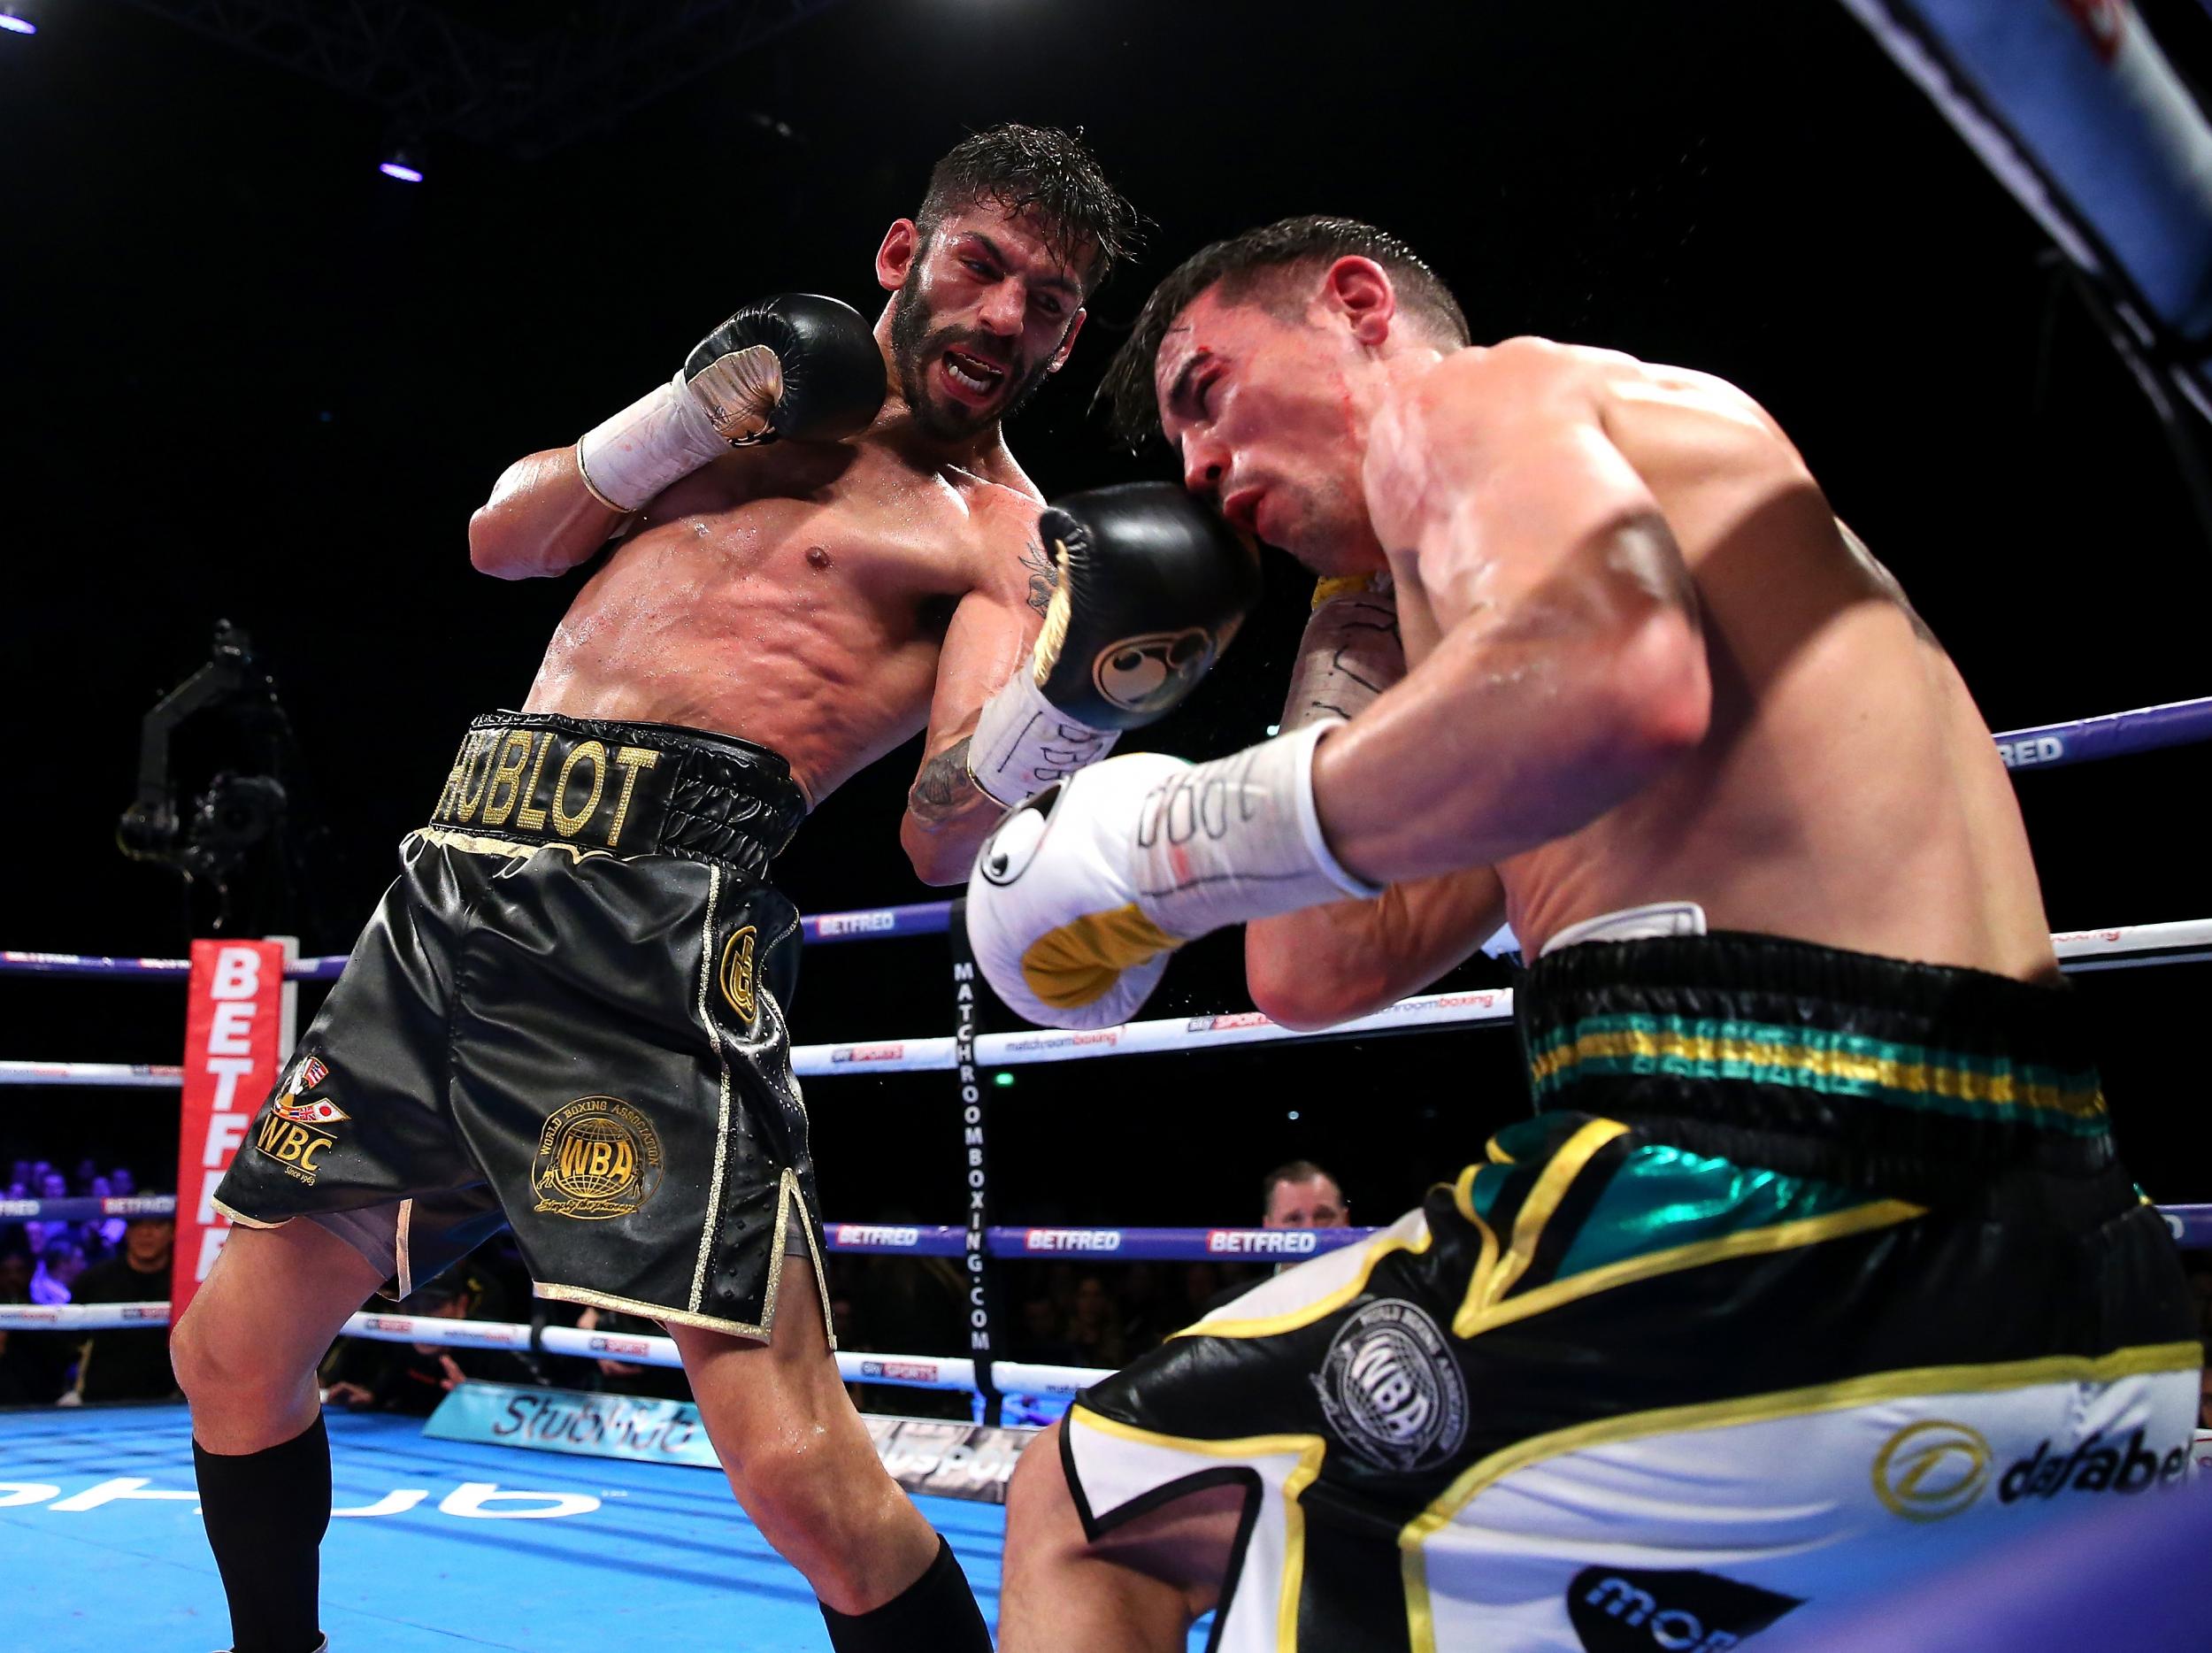 Linares beat Crolla in his past two fights